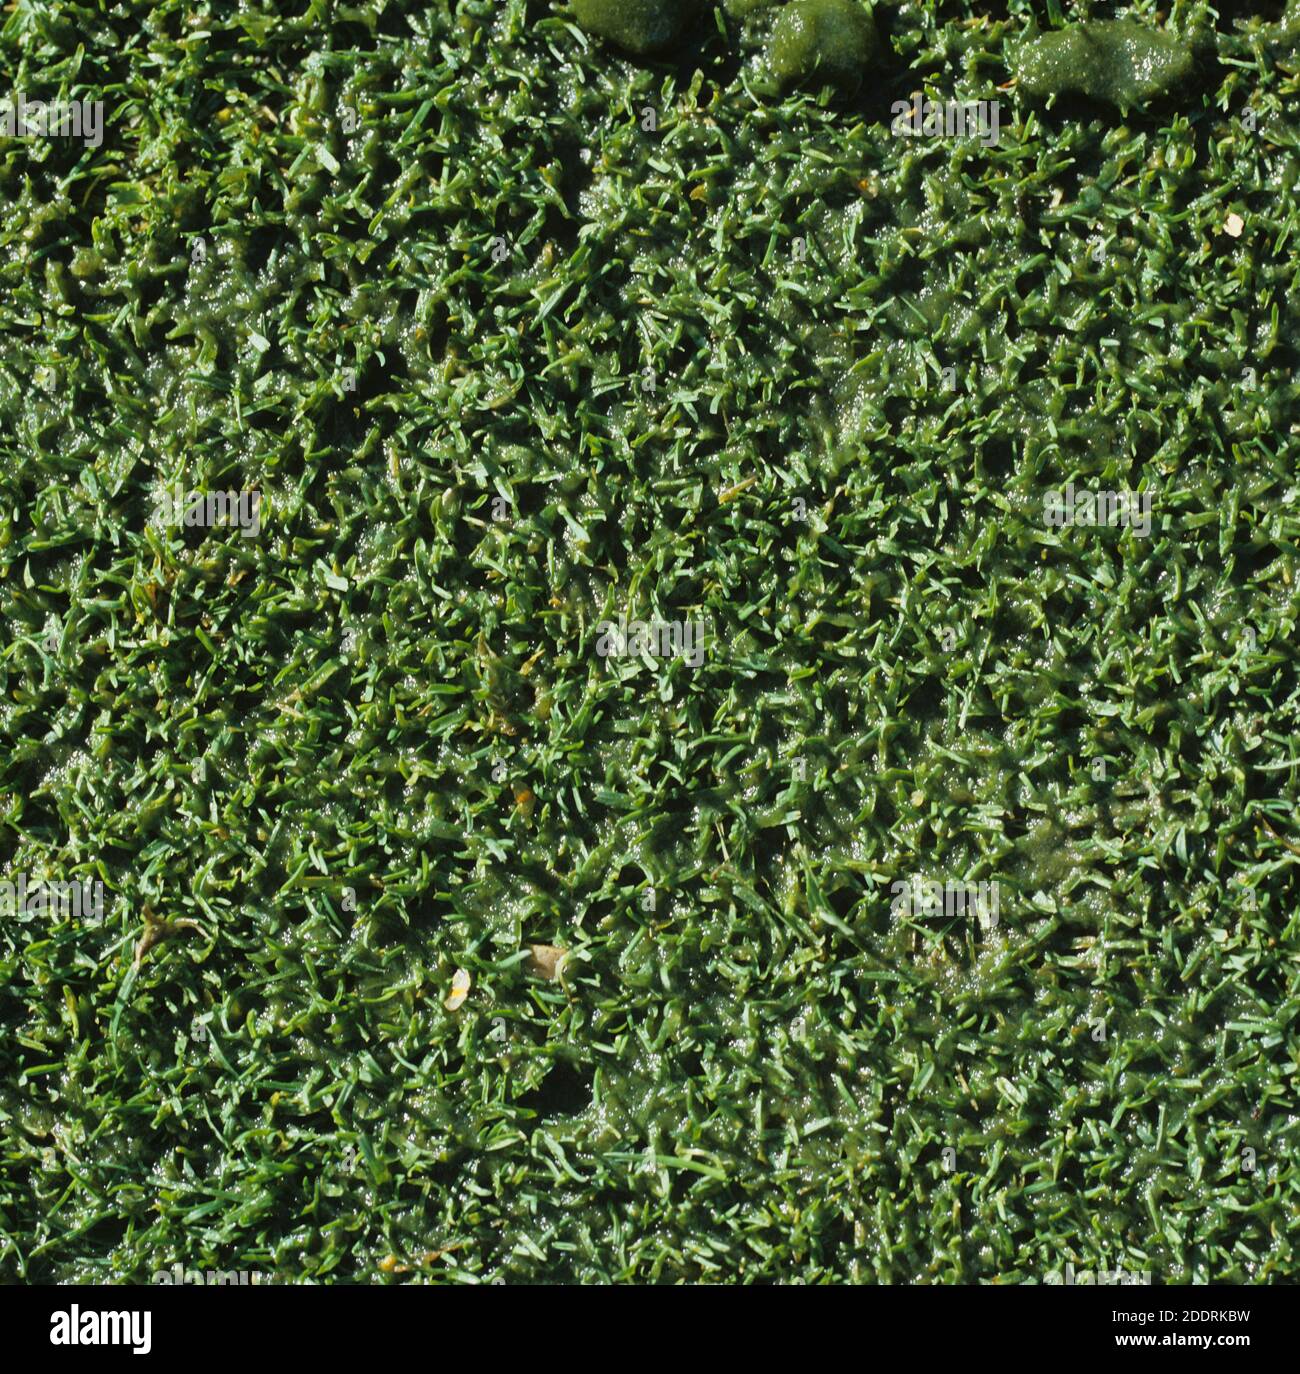 Algal slime (Cyanobacterium or other algae) formed on the surface of close mown turf of a damp golf course green after rain, Surrey, October Stock Photo